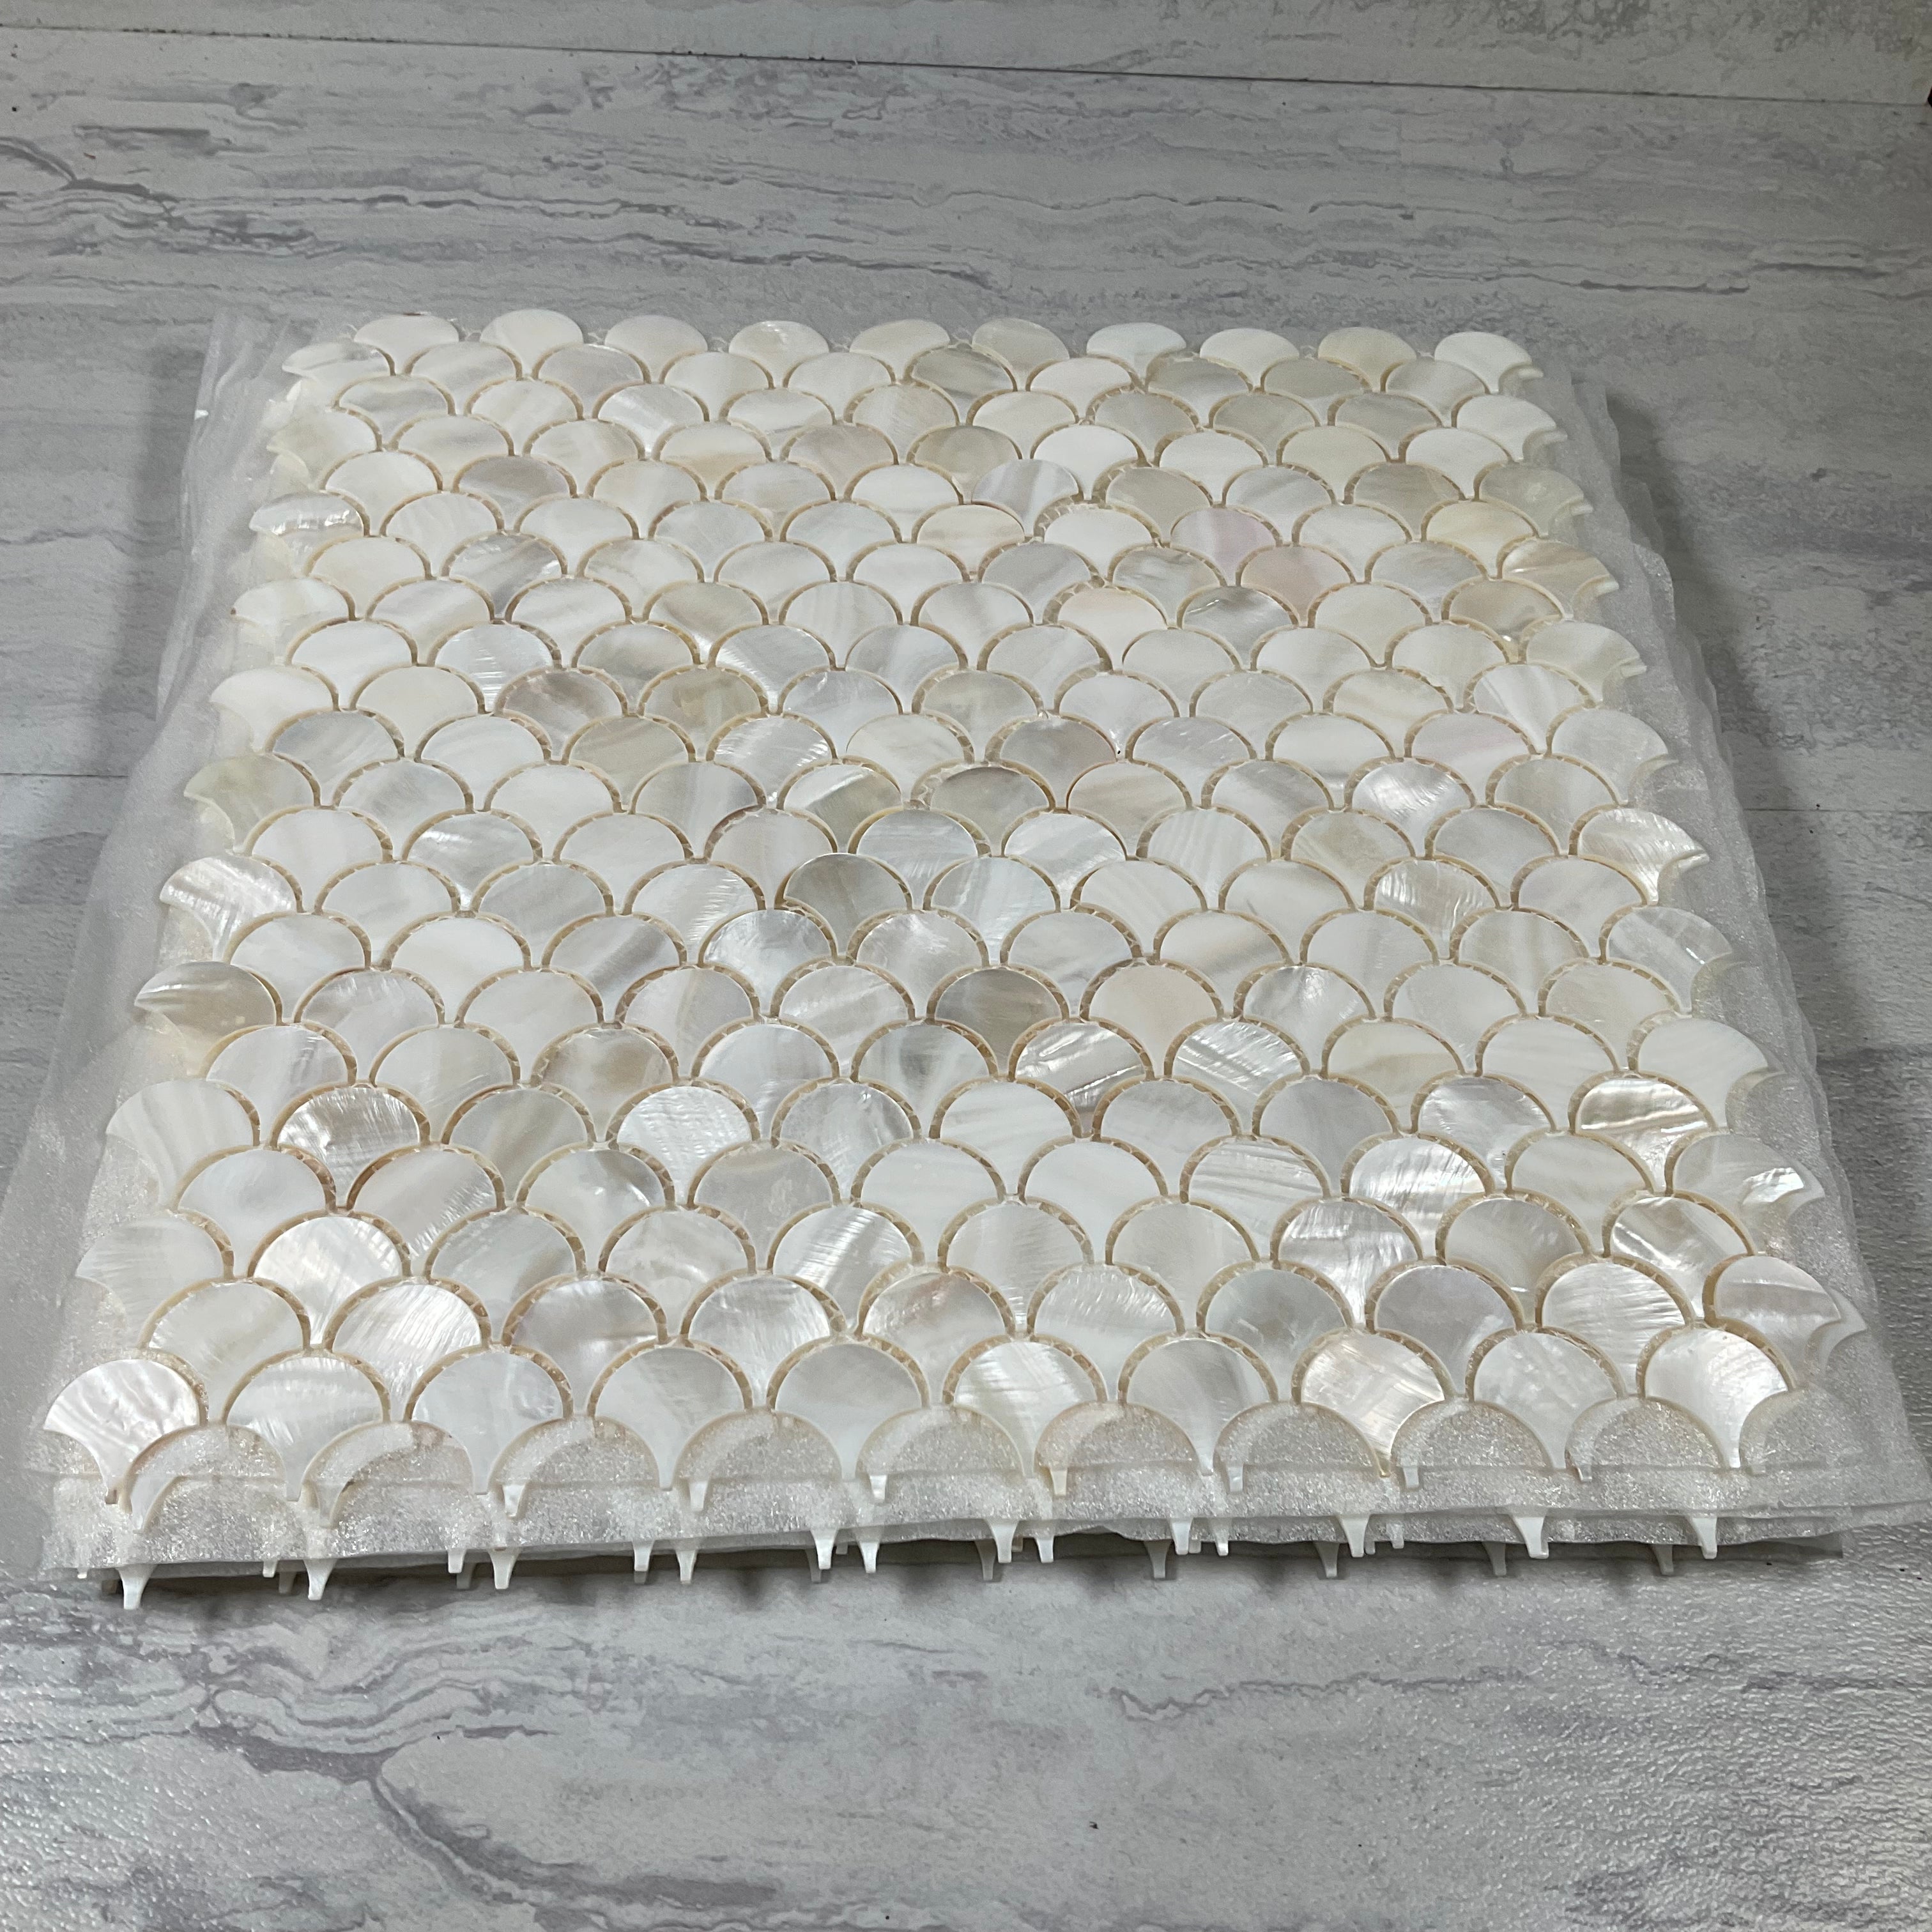 Mother of Pearl Light Colorful Fish Scale Shell Mosaic Tile -10 Sheets (7003738046647)